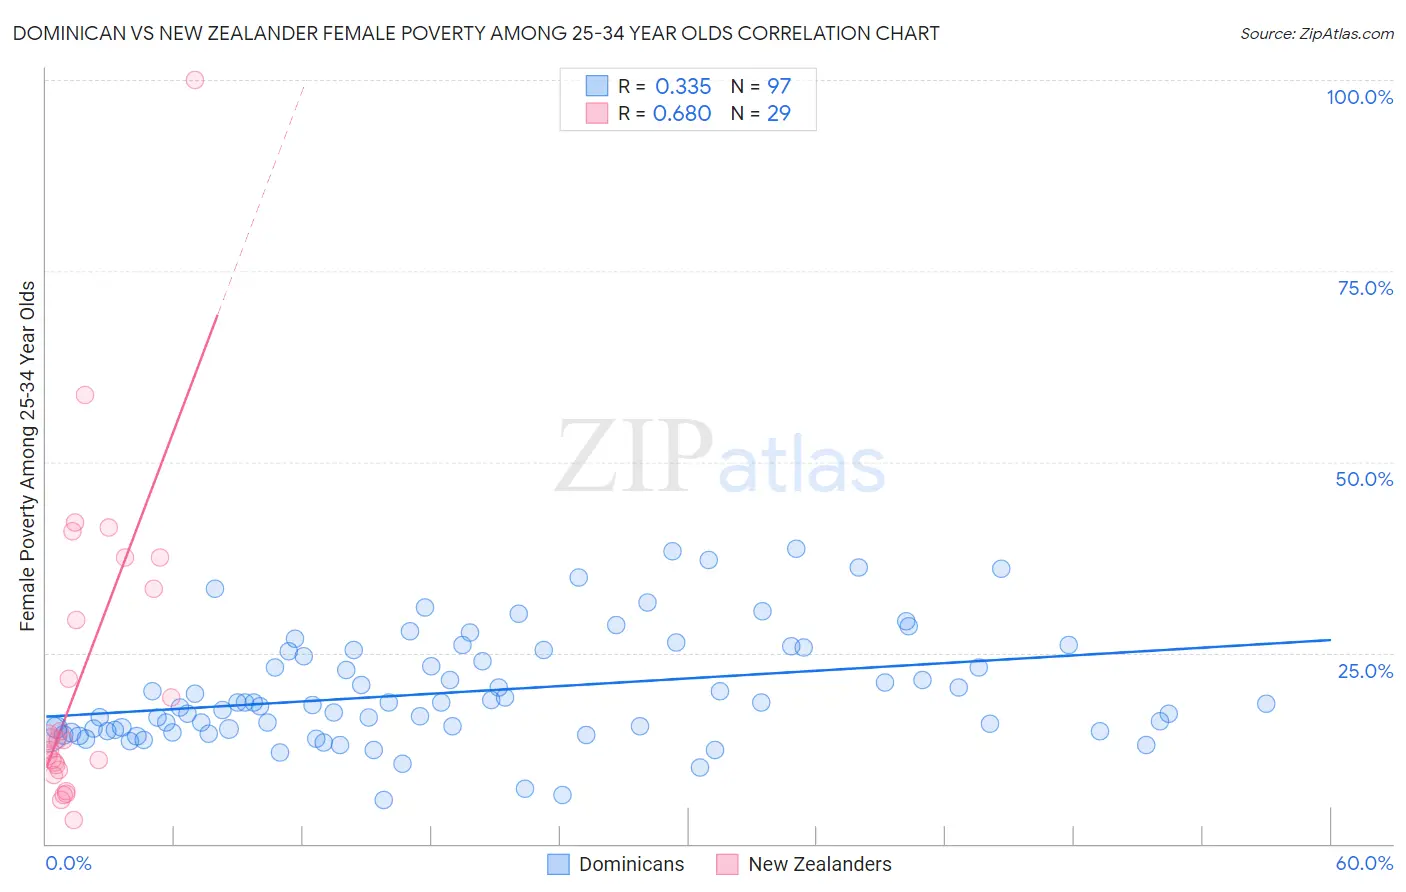 Dominican vs New Zealander Female Poverty Among 25-34 Year Olds